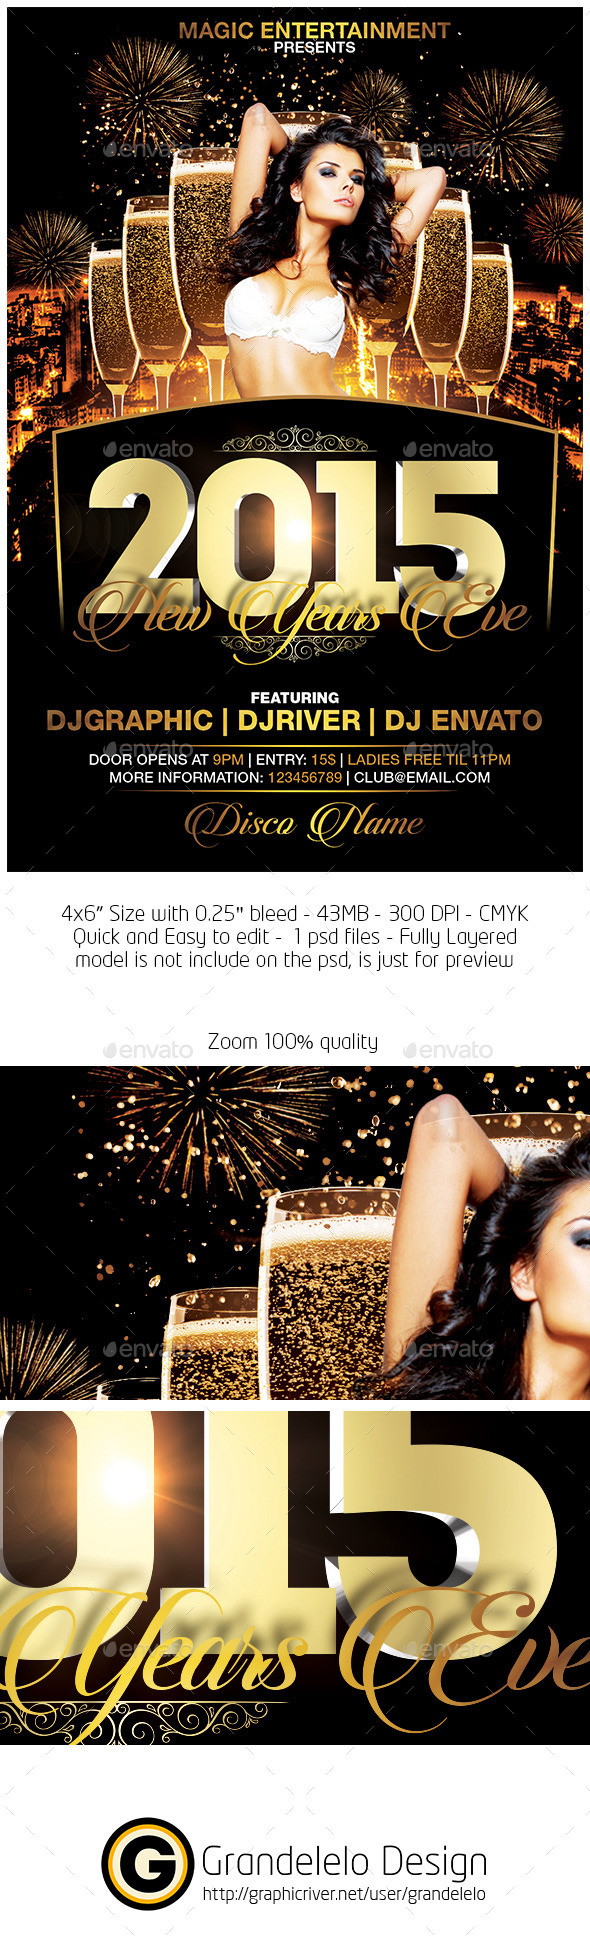 2015 New Years Eve Flyer